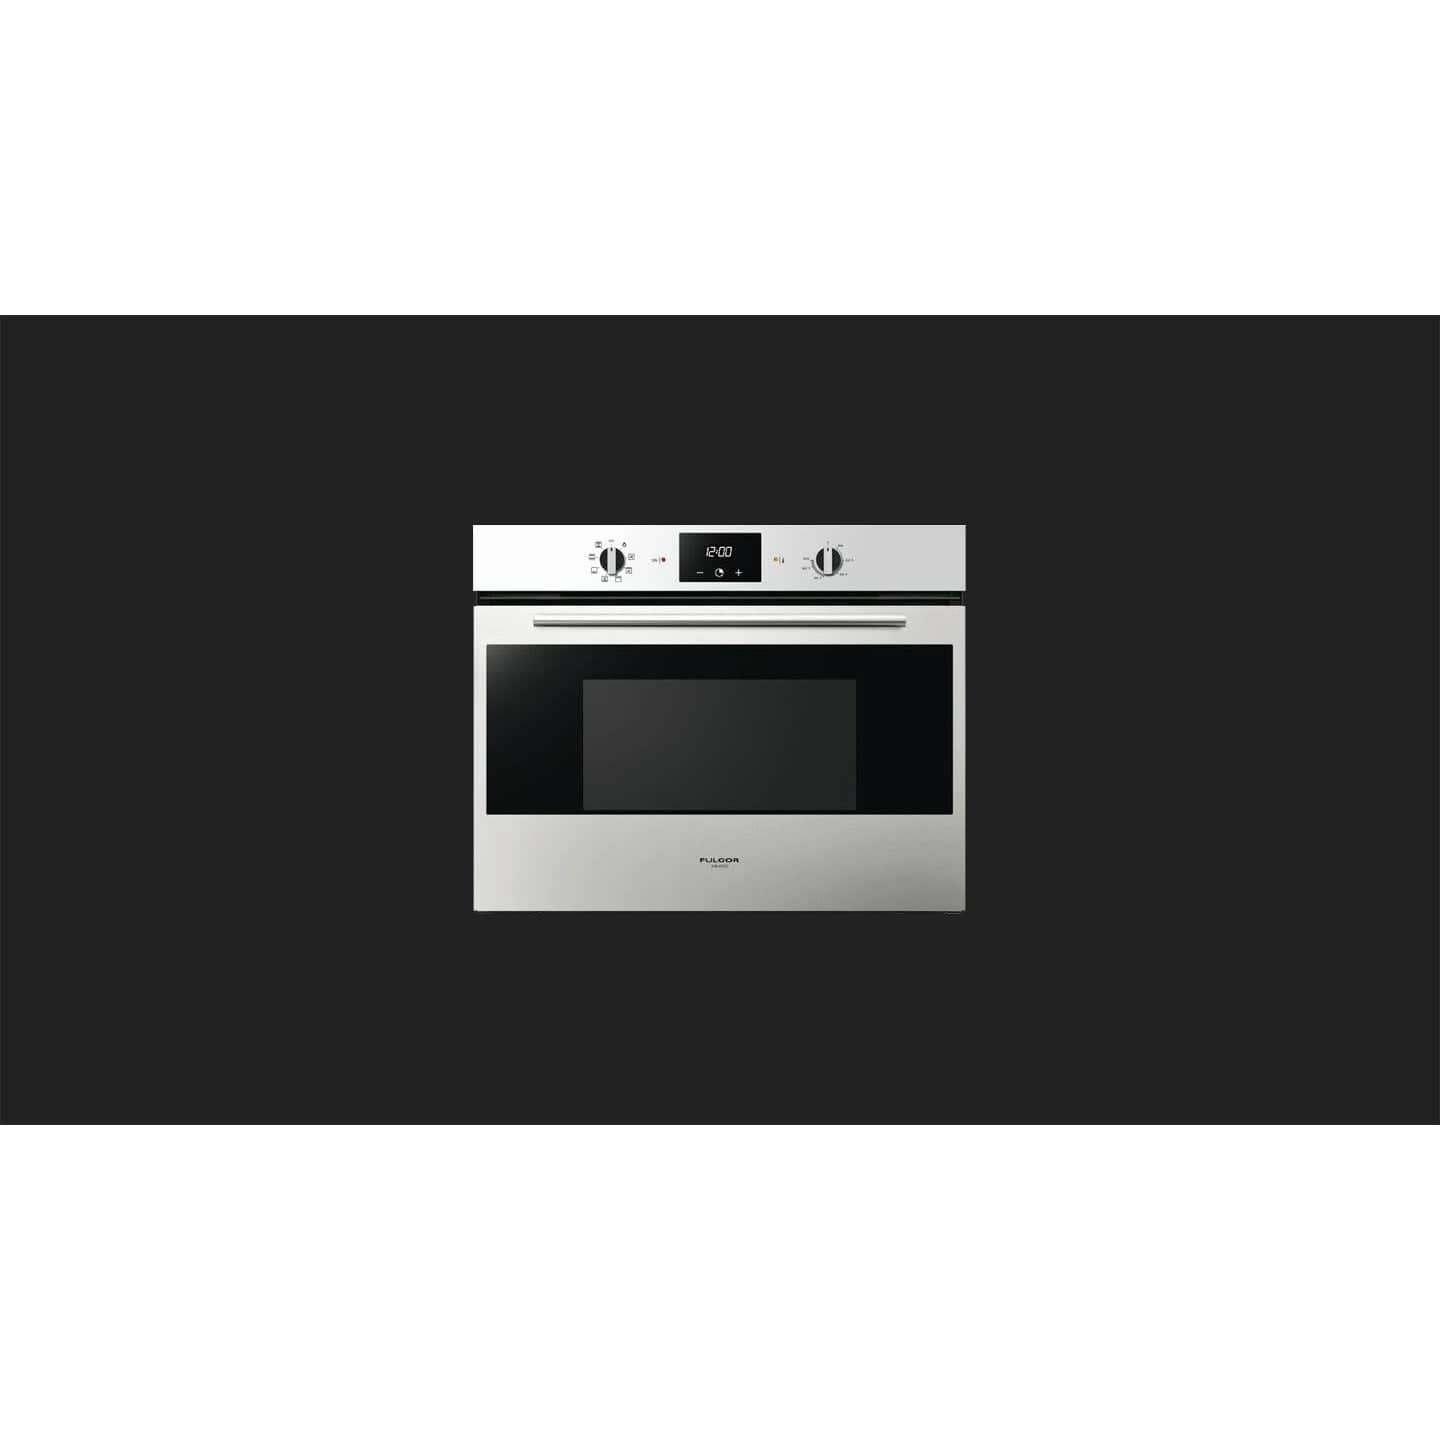 Fulgor Milano 30" Convection Electric Oven with 3.0 cu. ft. Oven Capacity - F1SM30S3 Ovens F1SM30S3 Luxury Appliances Direct